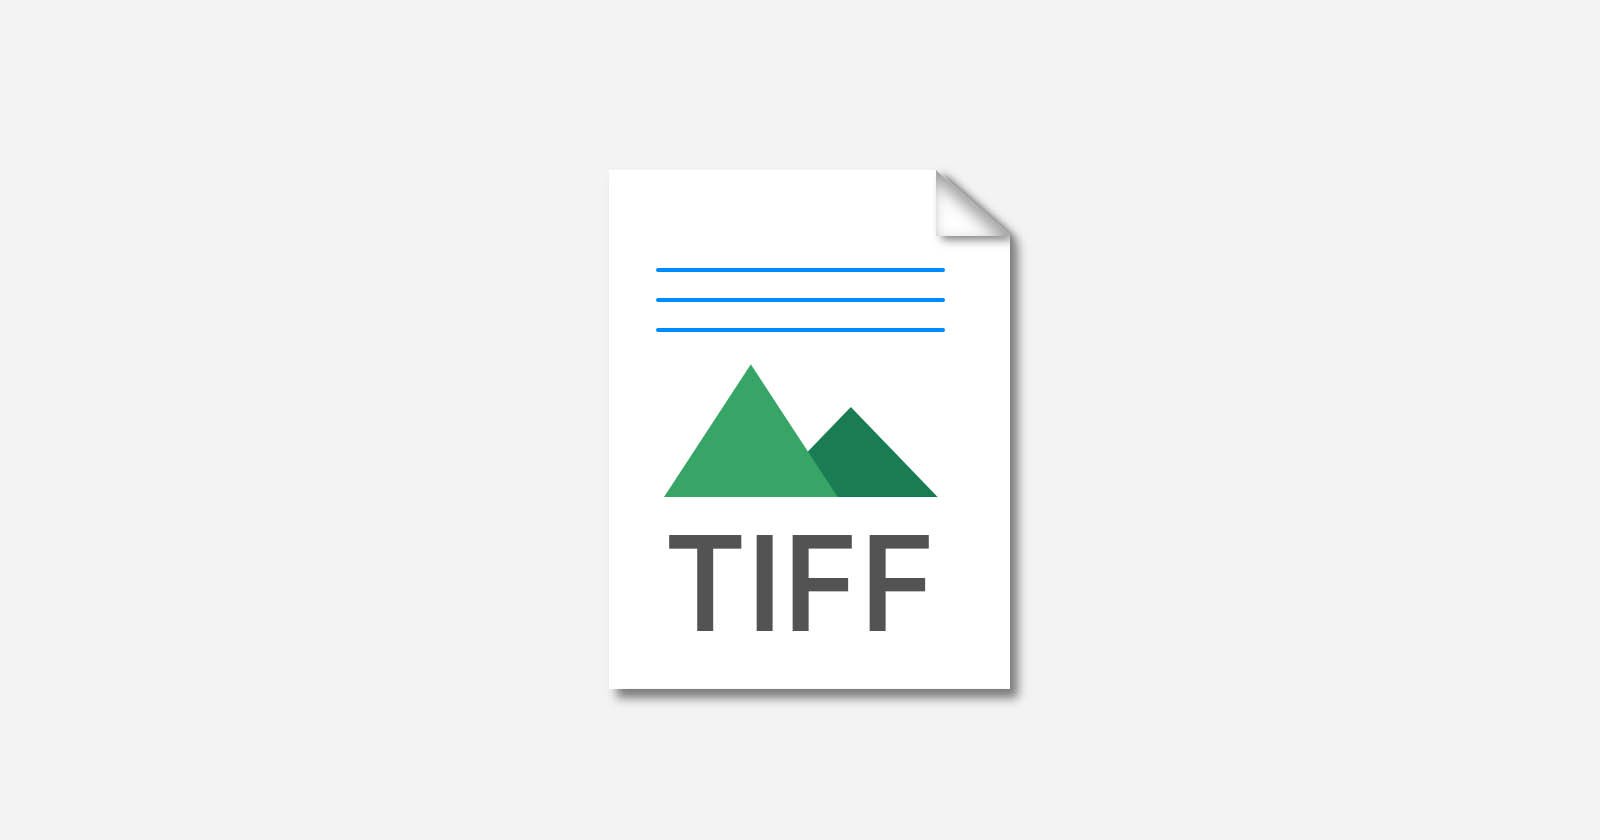 What is a TIFF File? Everything You Need to Know